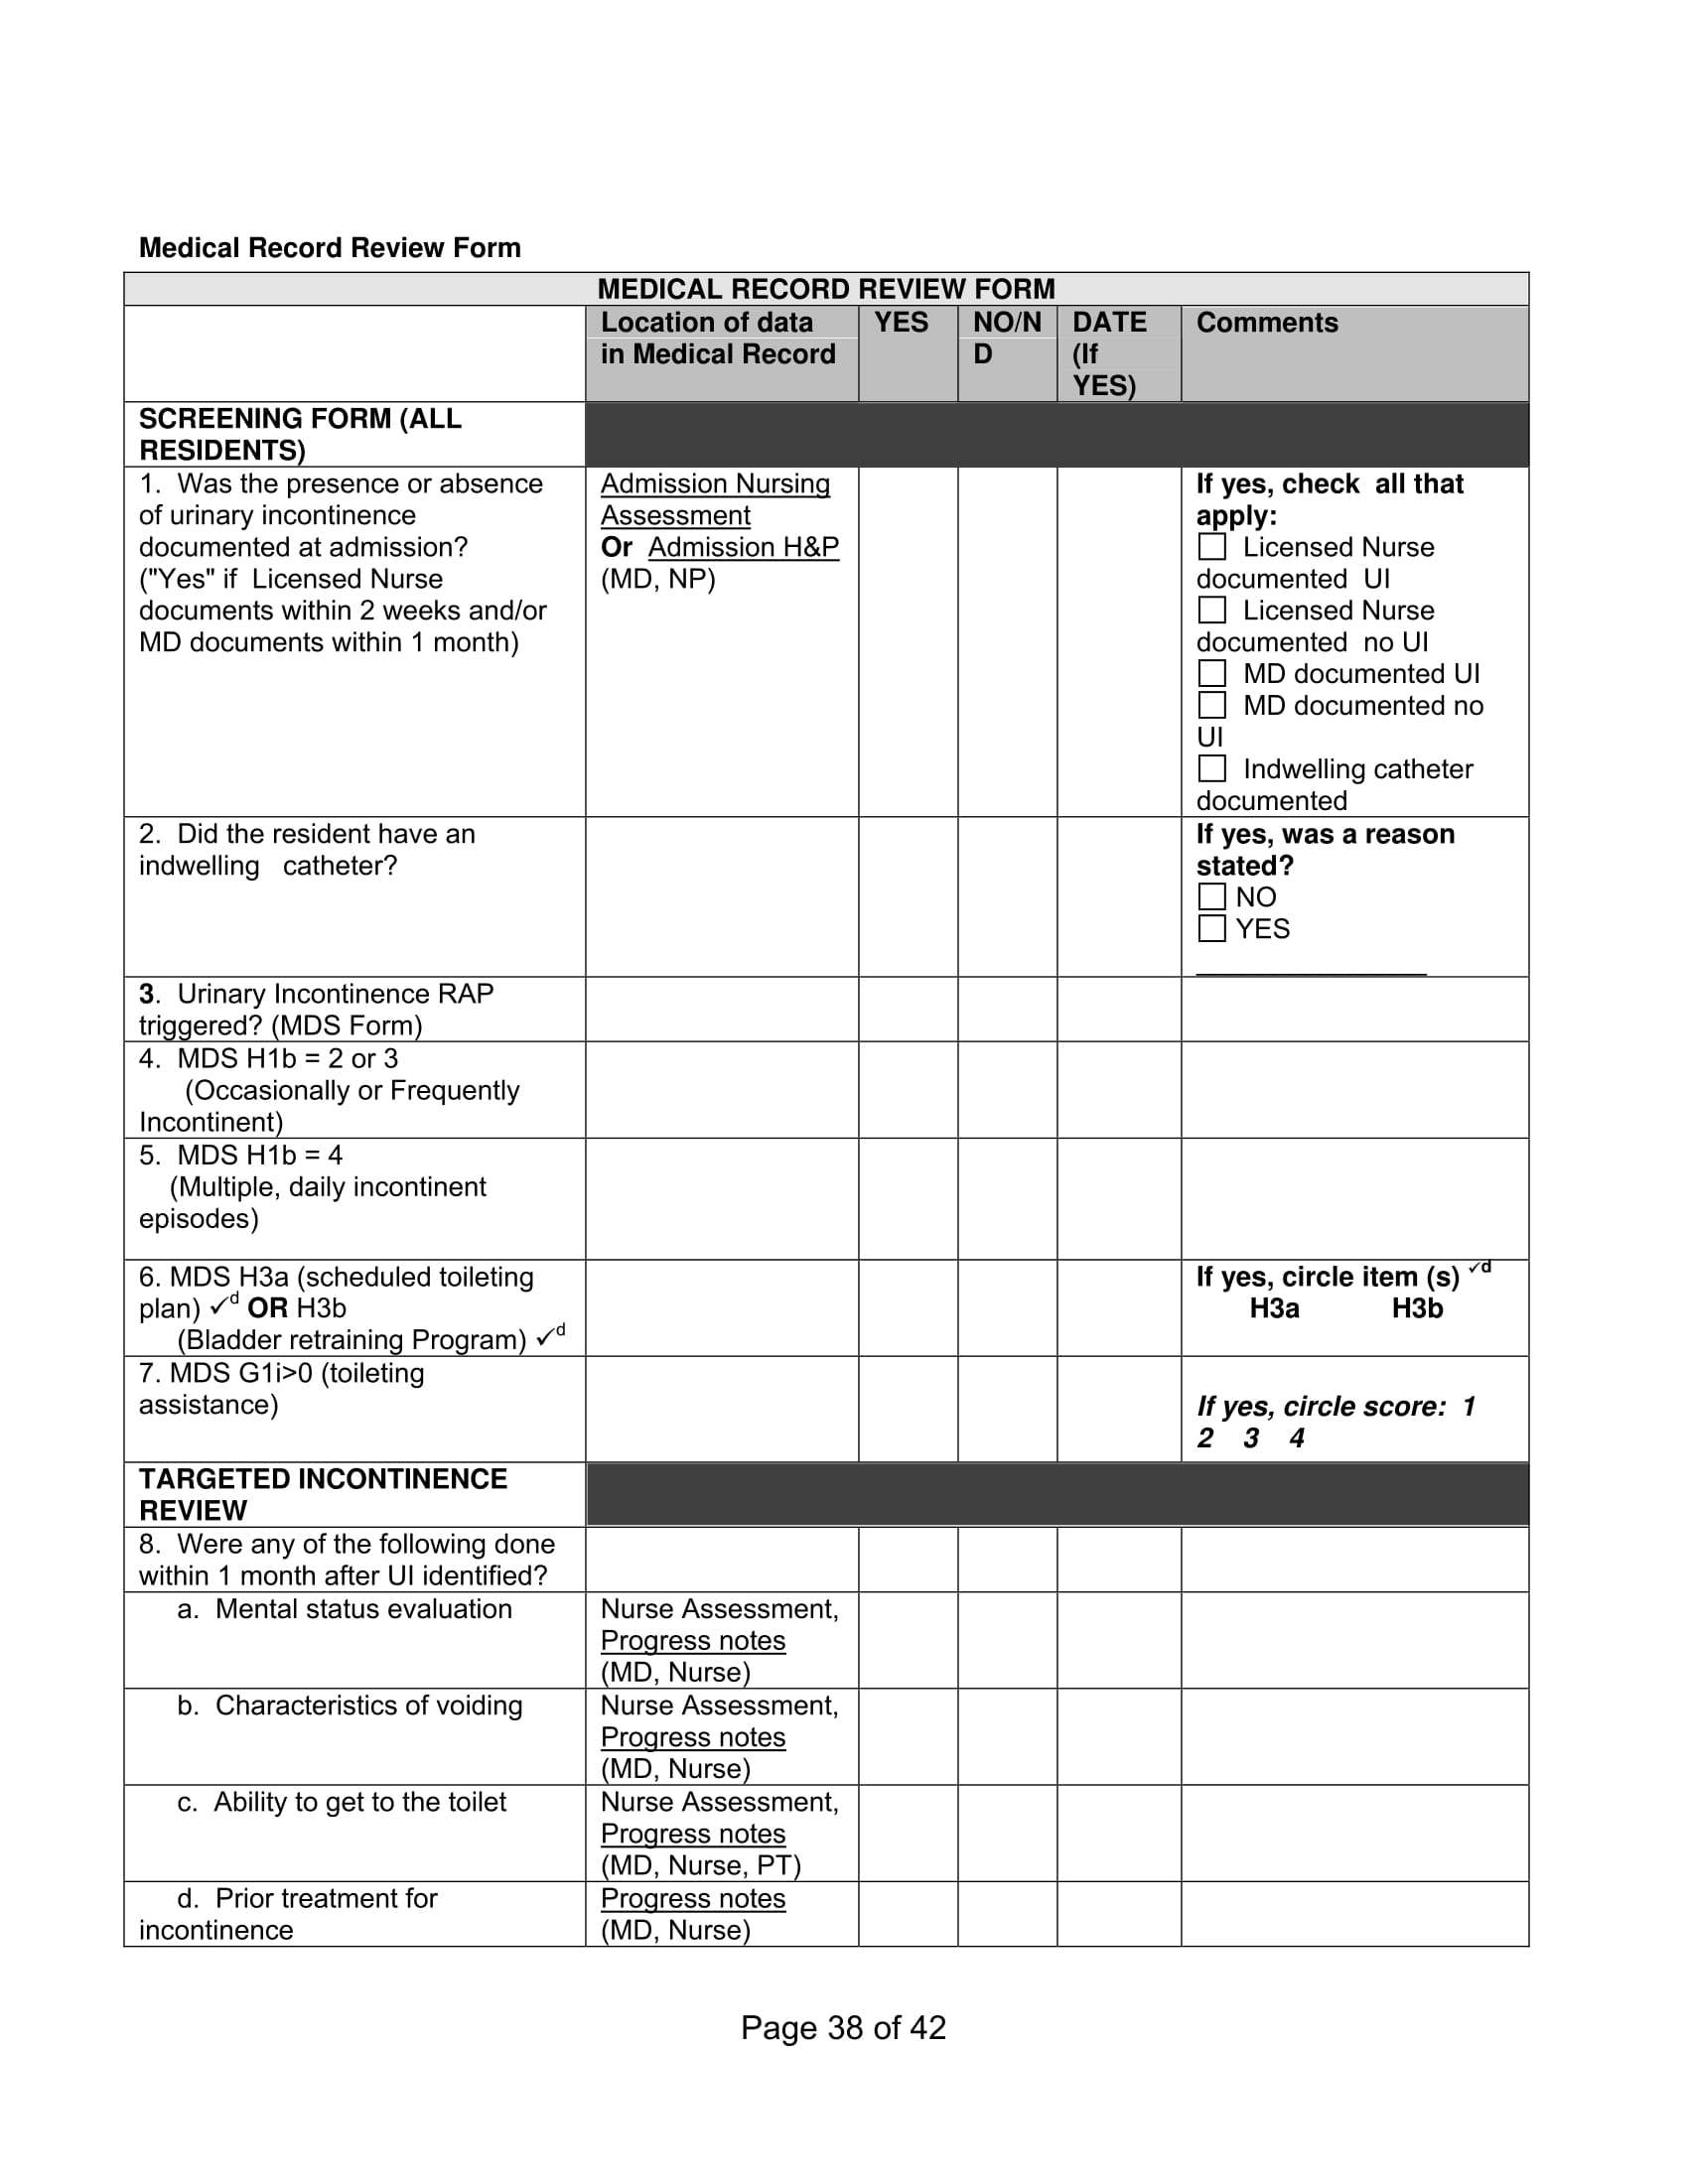 medical record review form 1